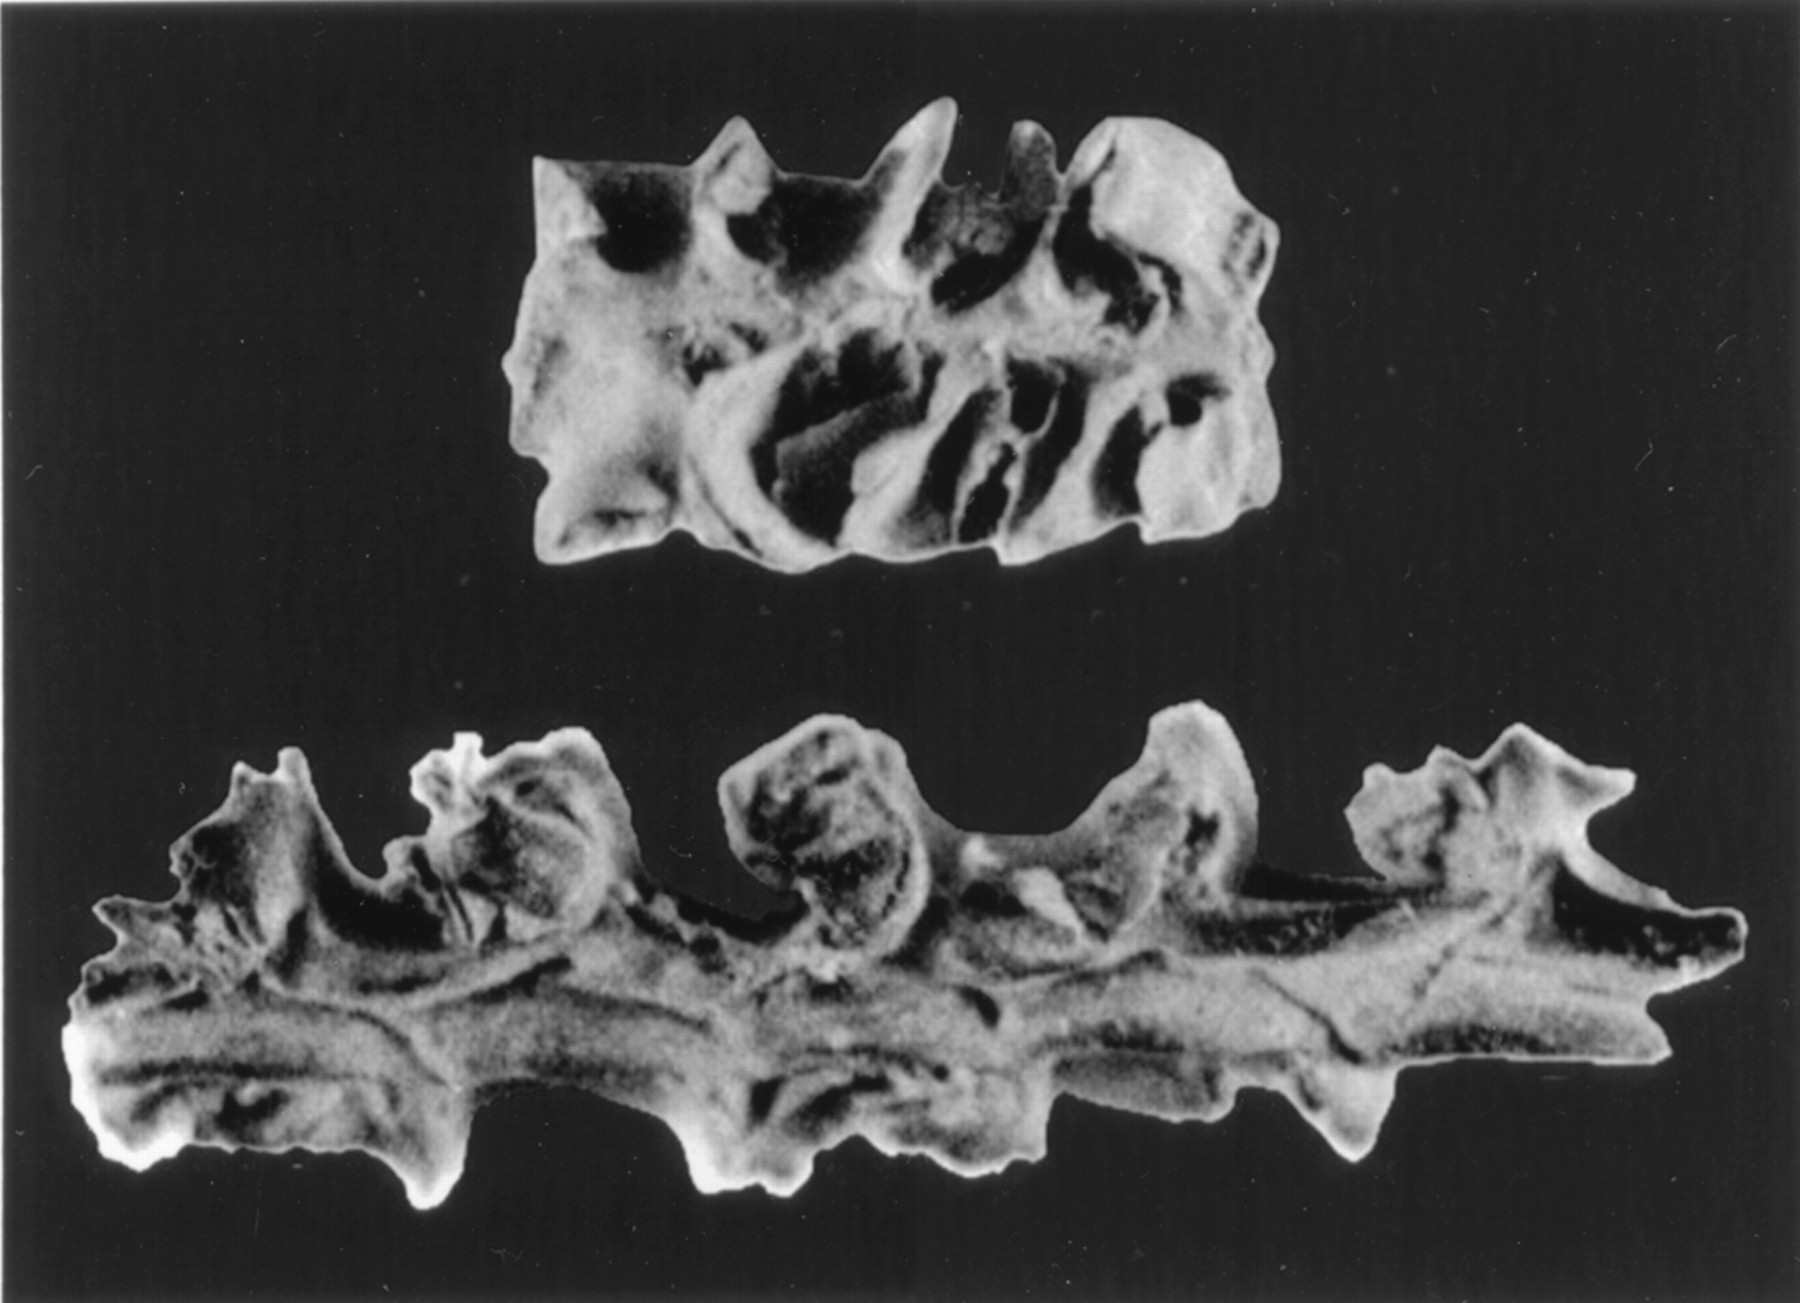 Black and white photograph of corn ears that are more than 6000 years old from Guilá Naquitz cave in Oaxaca, Mexico. The photo shows two linear structures that are partially shriveled.